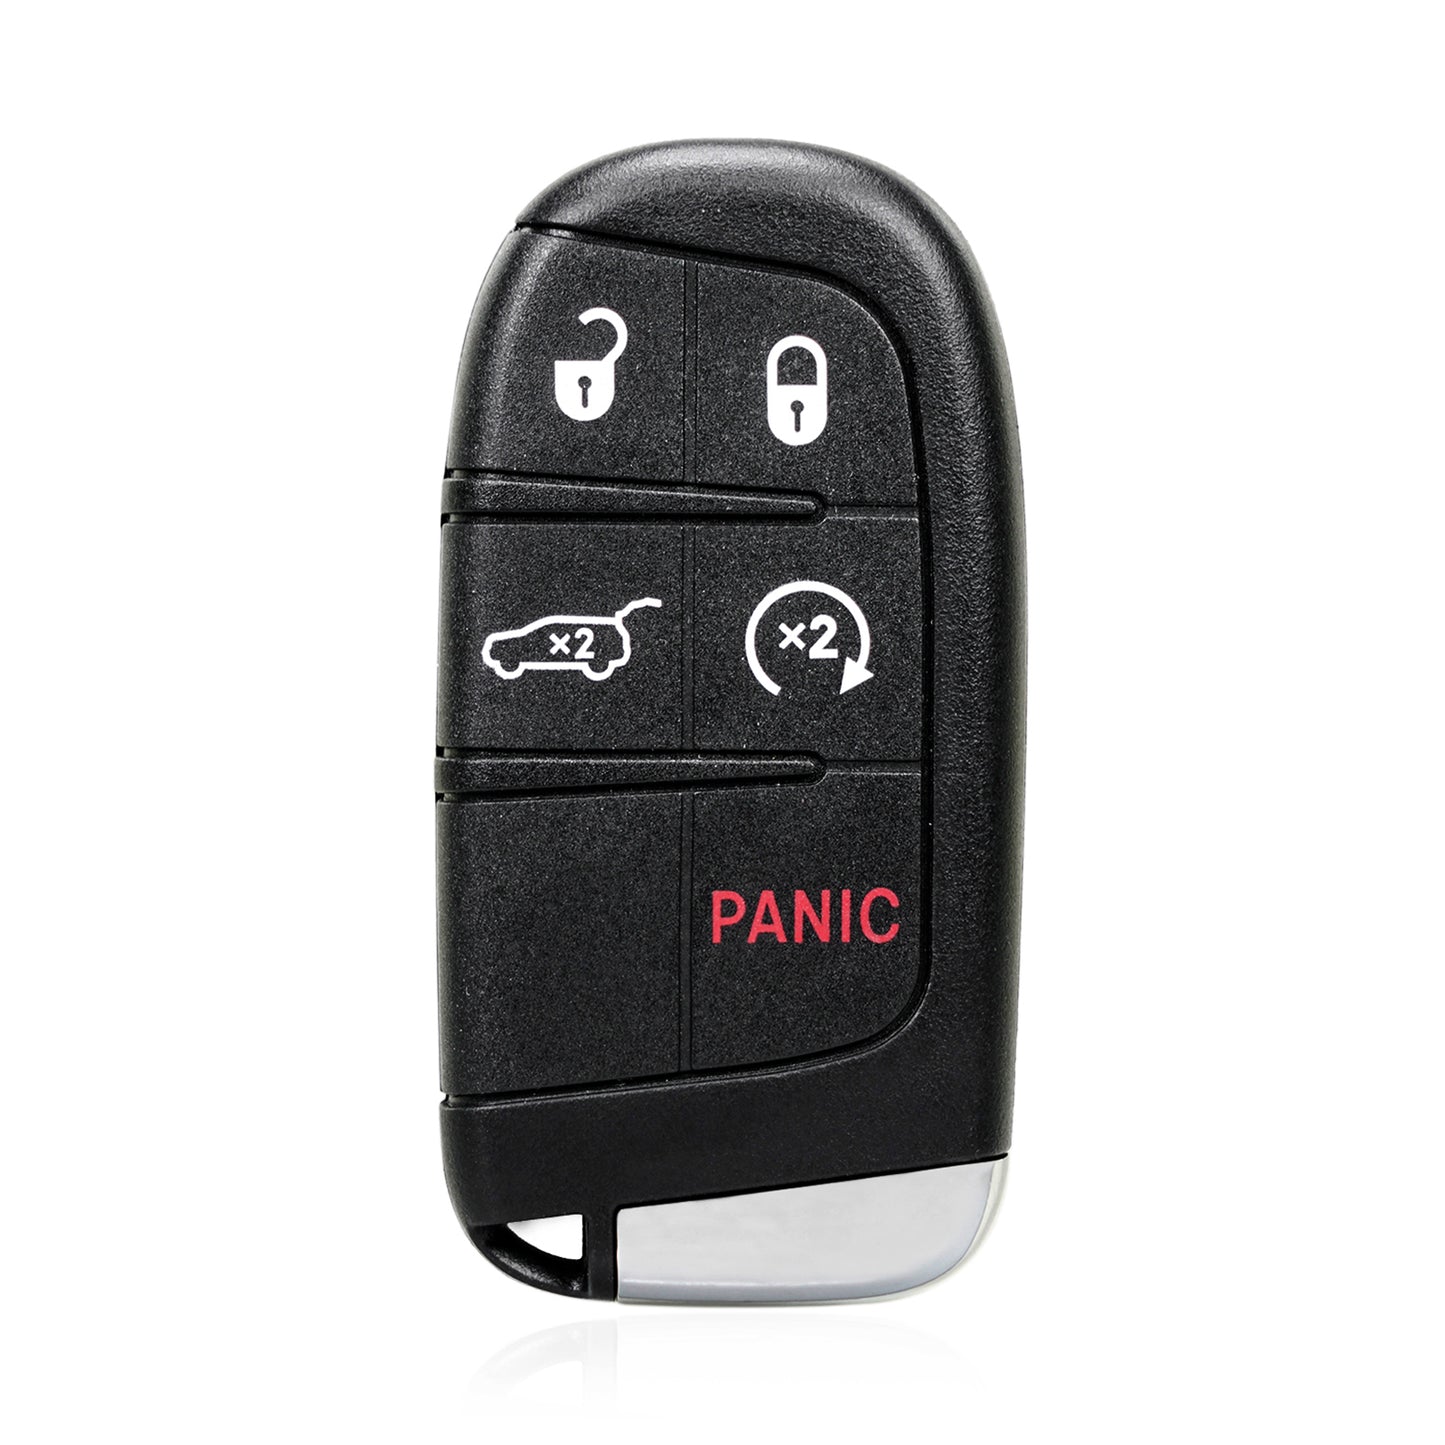 5 Buttons 433MHz Keyless Entry Fob Remote Car Key For 2017-2021 JEEP COMPASS FCC ID: M3N-40821302 SKU : J720